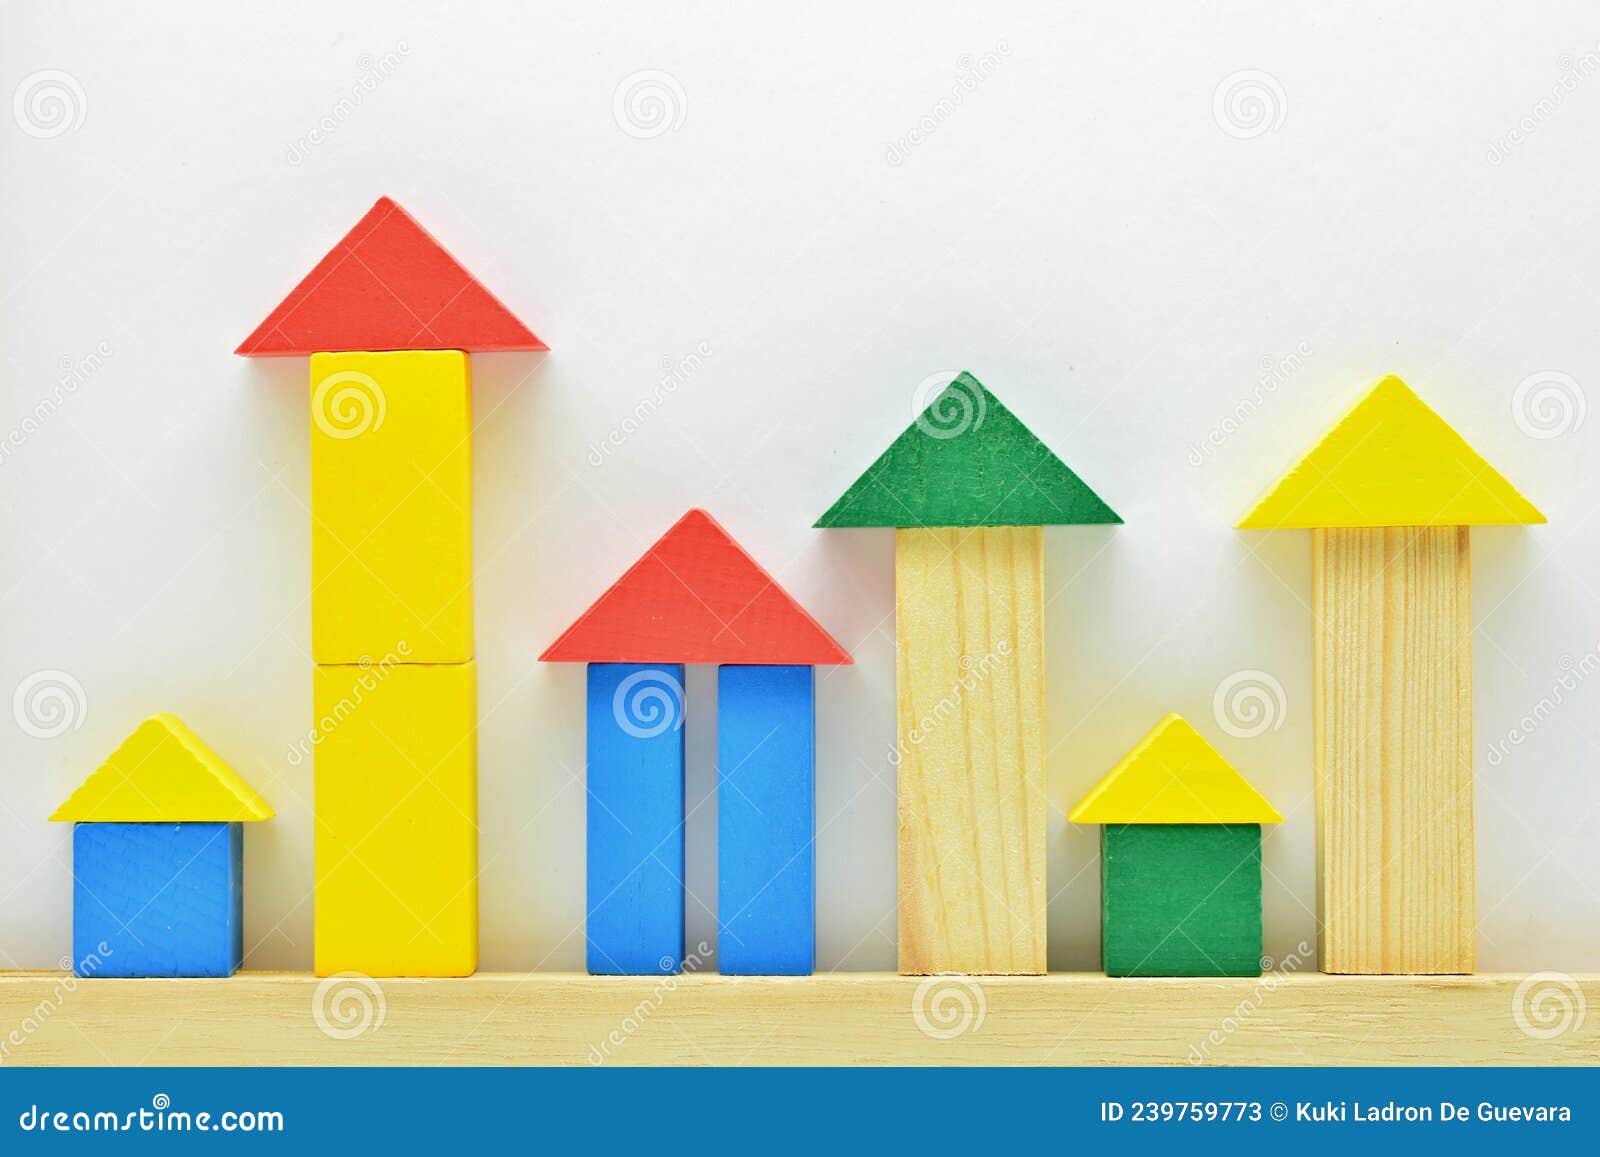 construction with colored wooden blocks, with white background